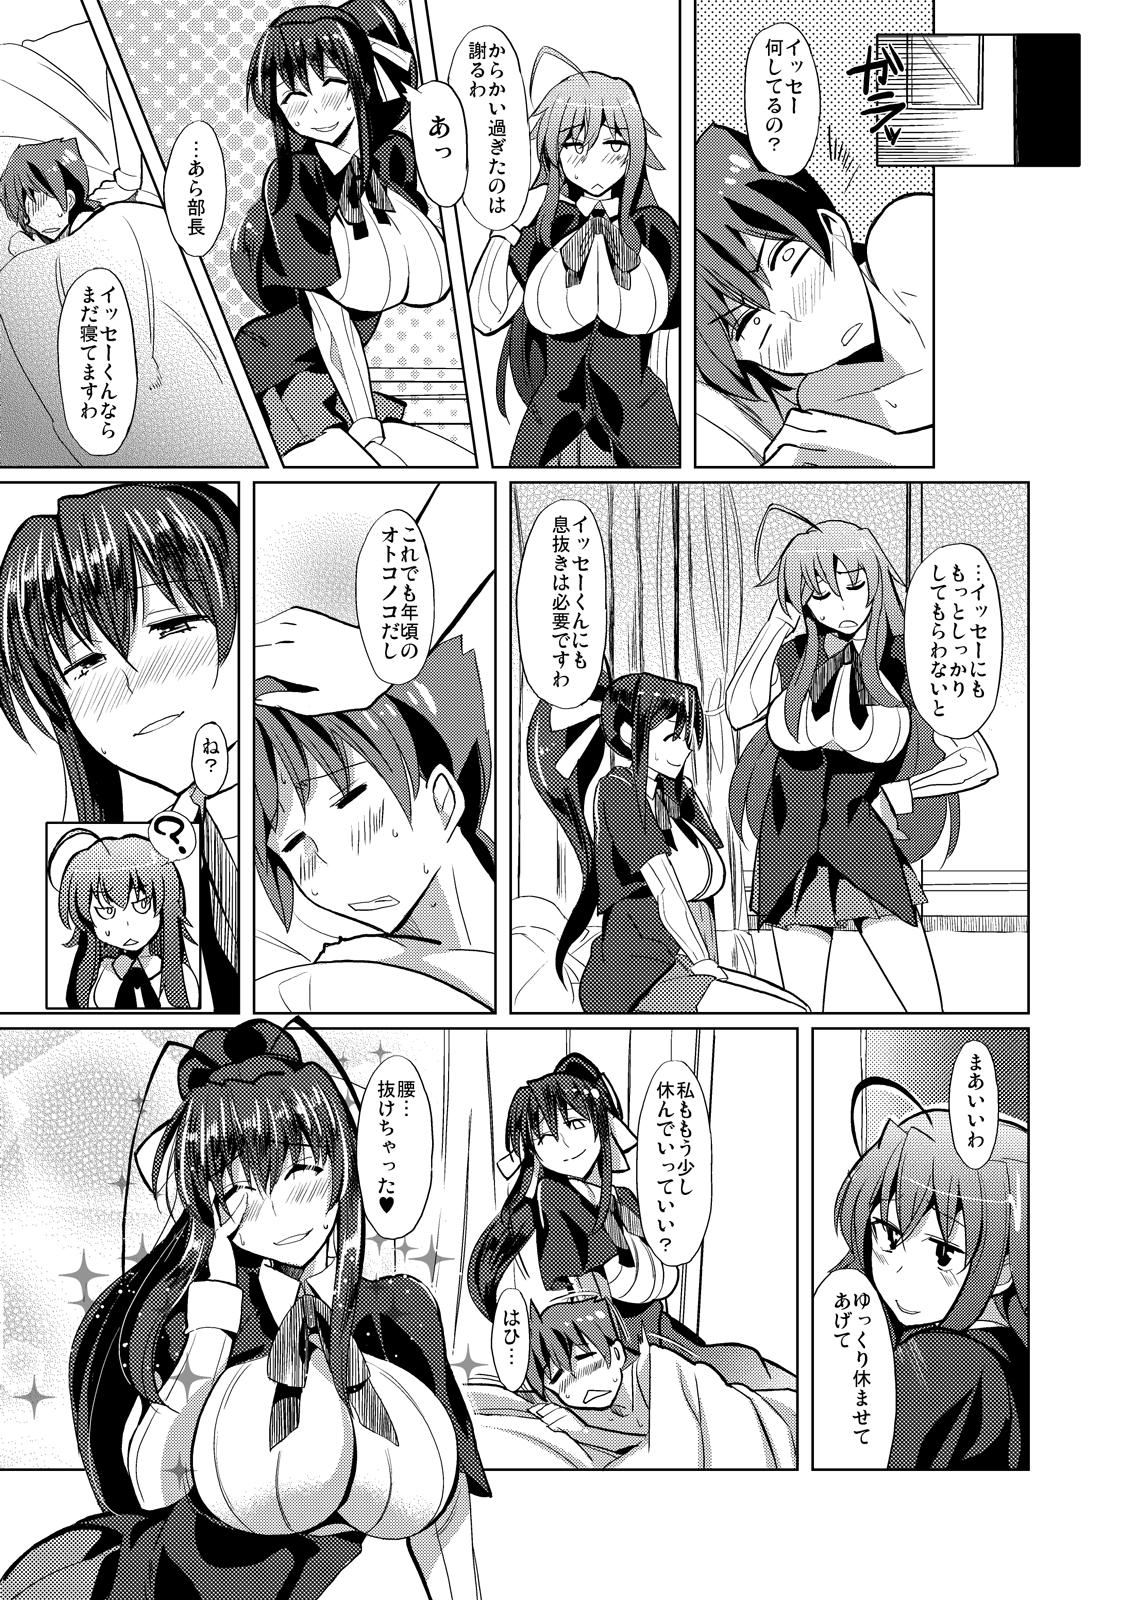 Stepfamily Akeno-san to DxD - Highschool dxd Cousin - Page 25